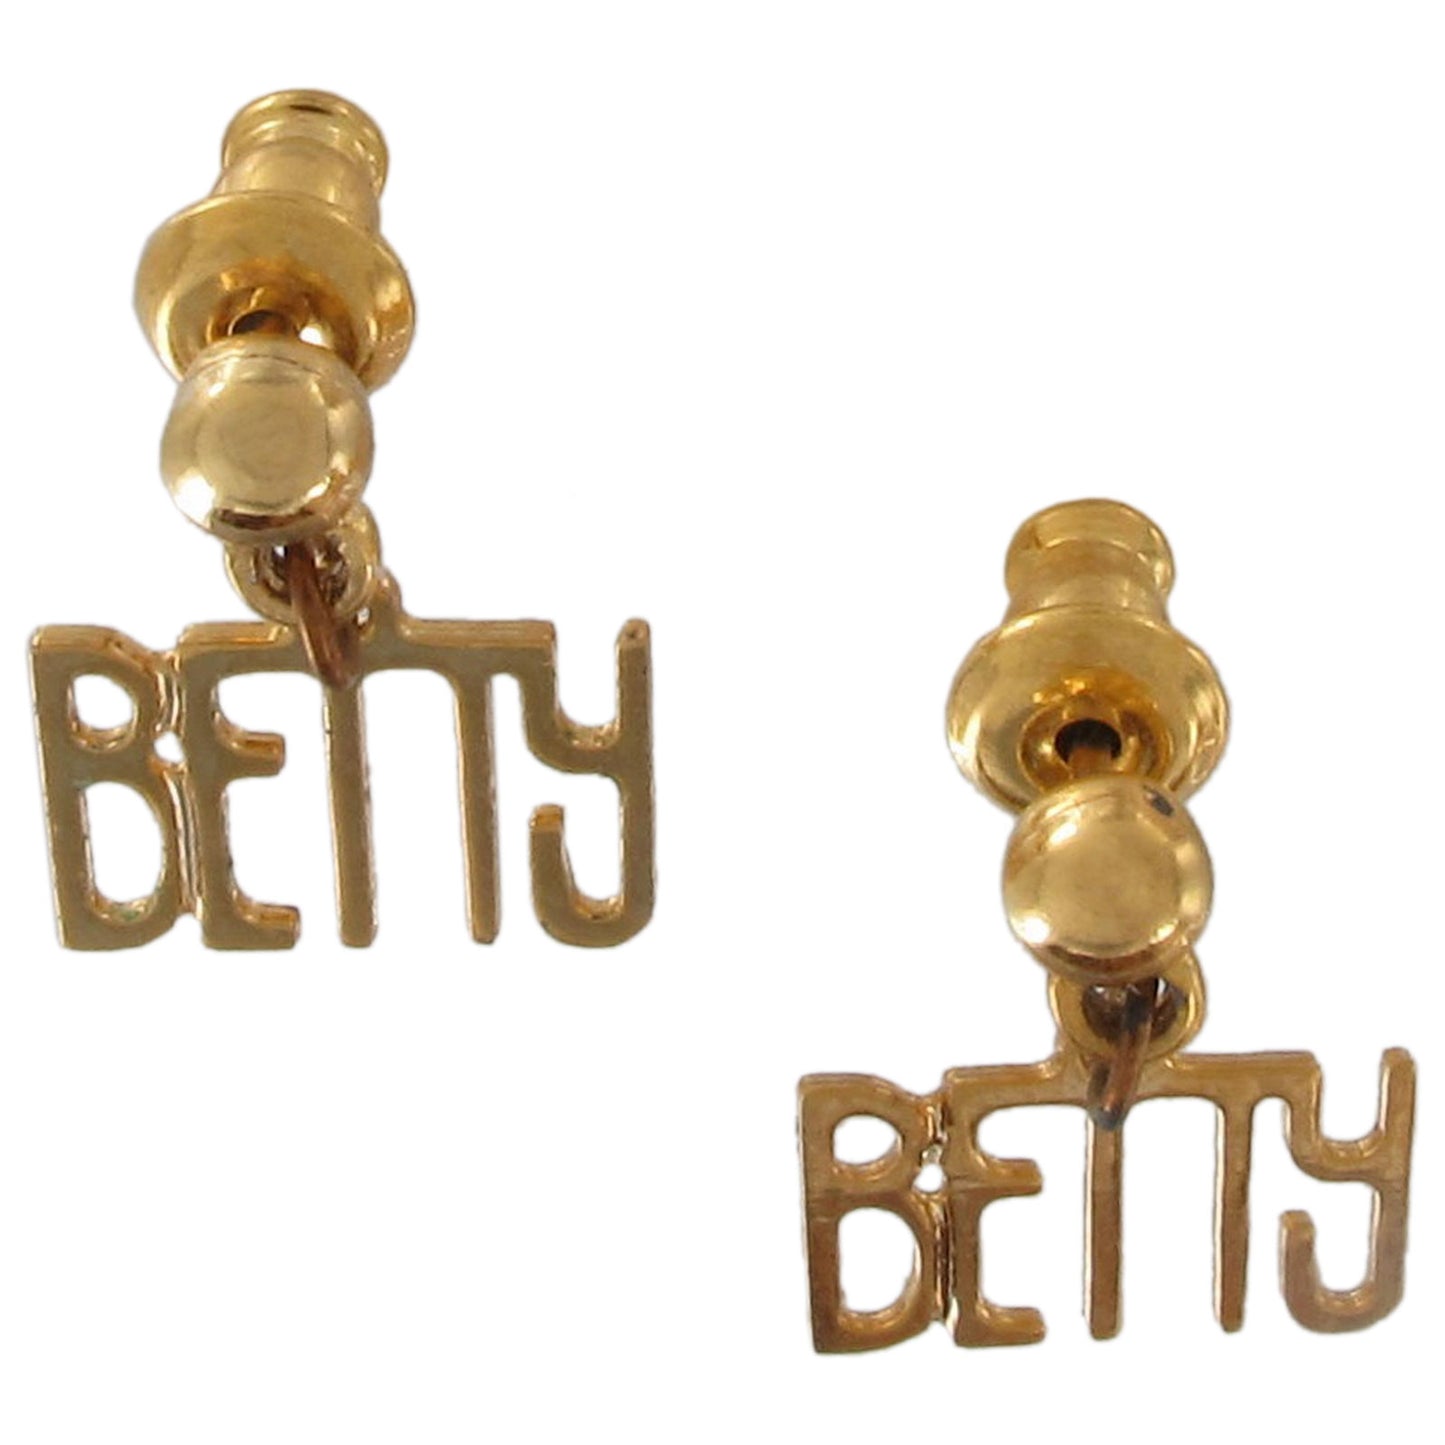 Vintage Personalized Trend The Name Game Gold Tone Pierced Earrings